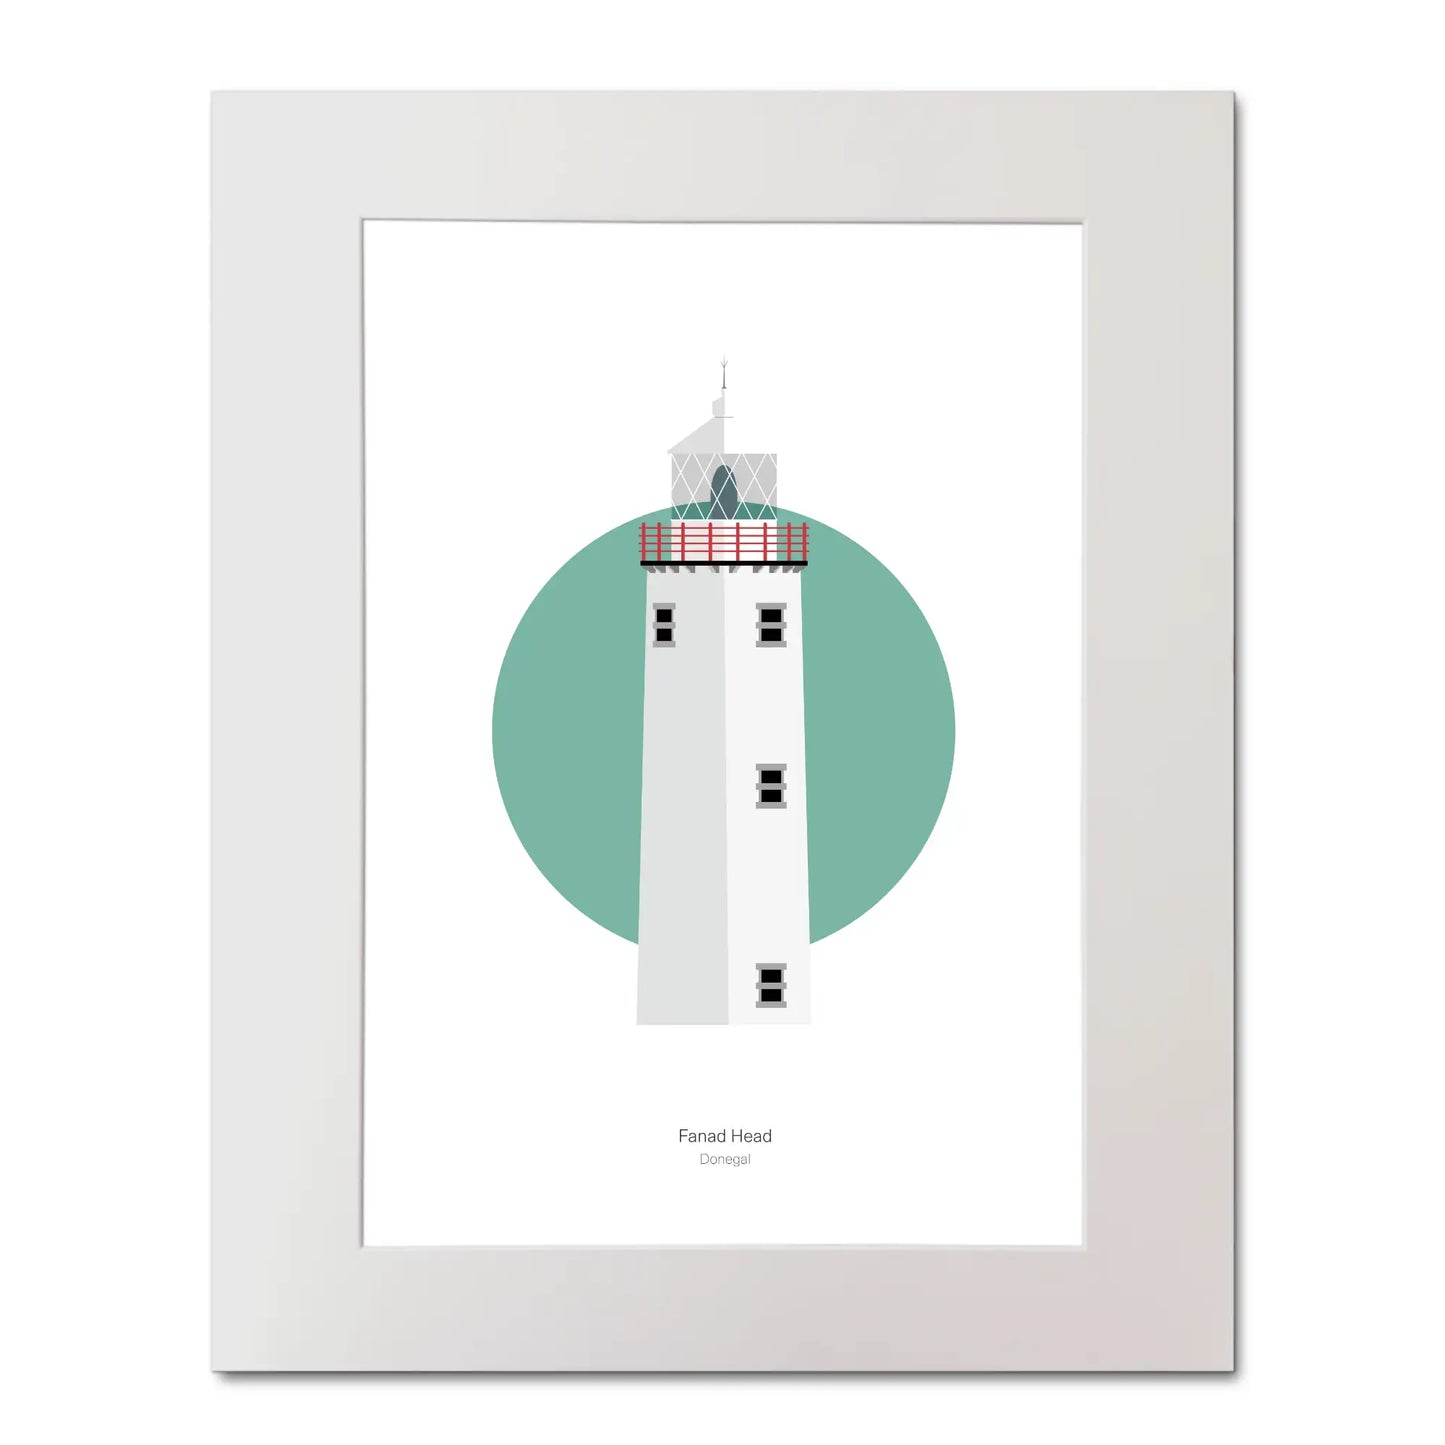 Illustration of Fanad Head lighthouse on a white background inside light blue square, mounted and measuring 40x50cm.